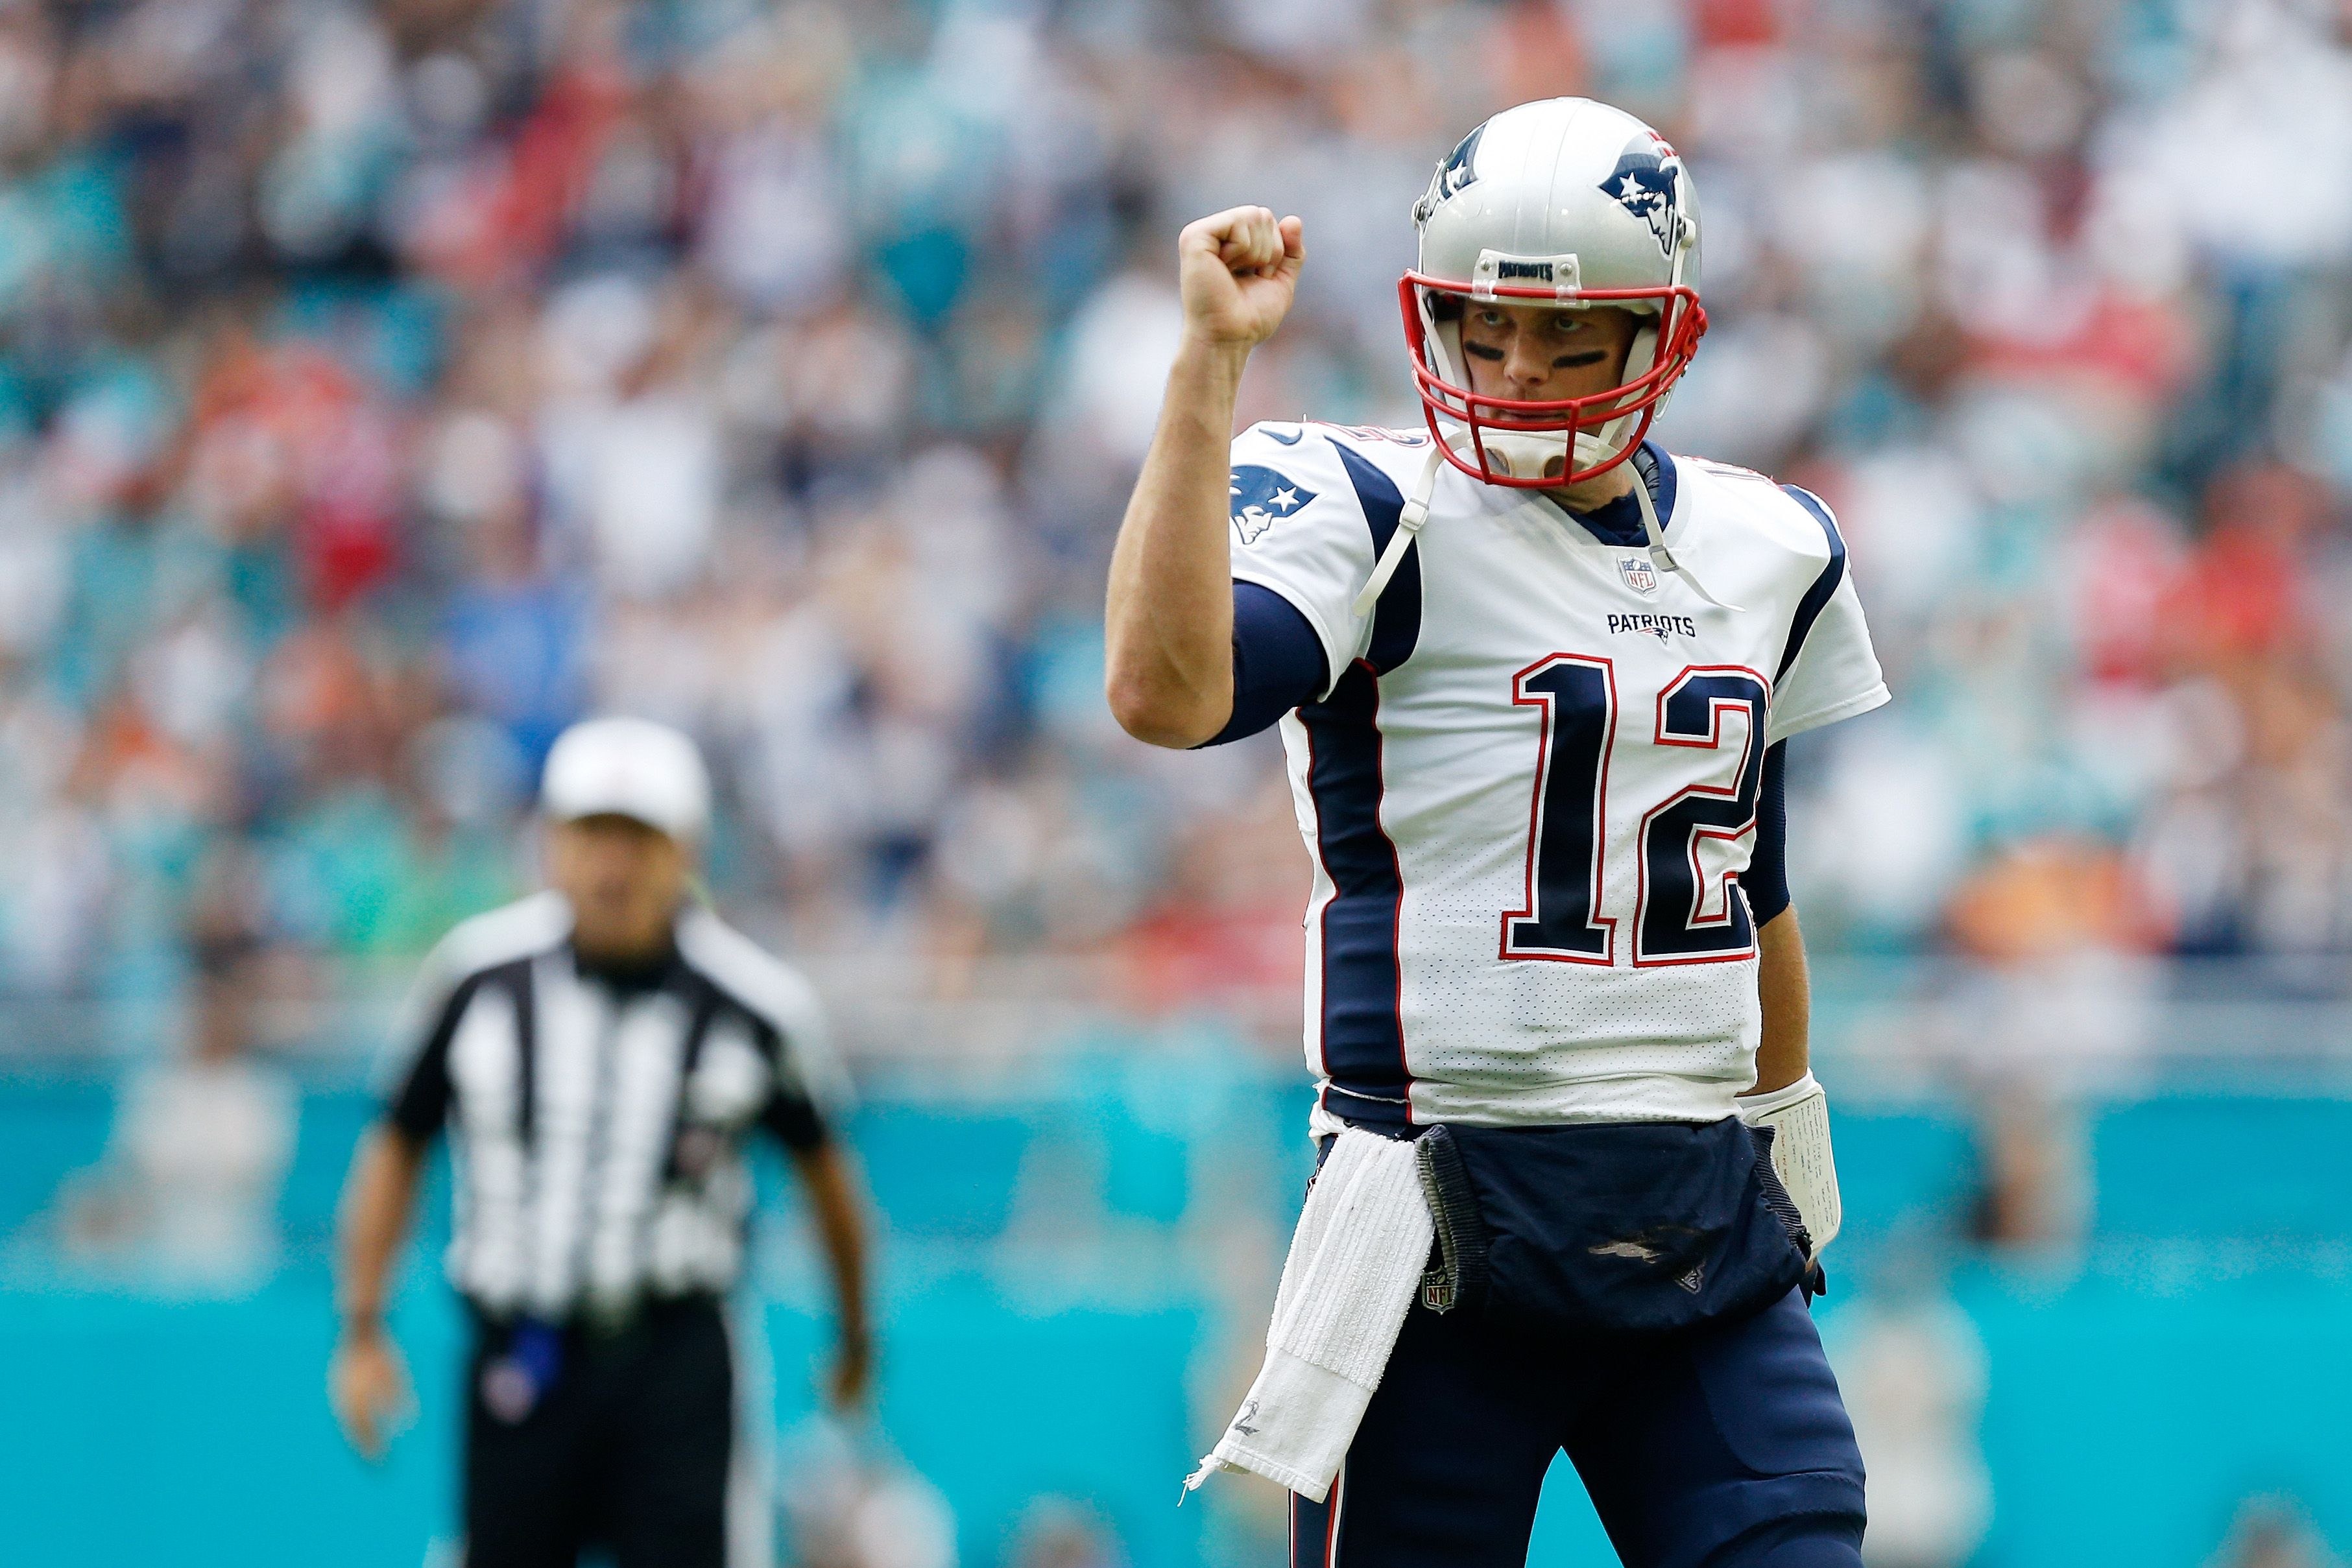 Patriots vs. Dolphins: Free live stream, TV channel, how to watch